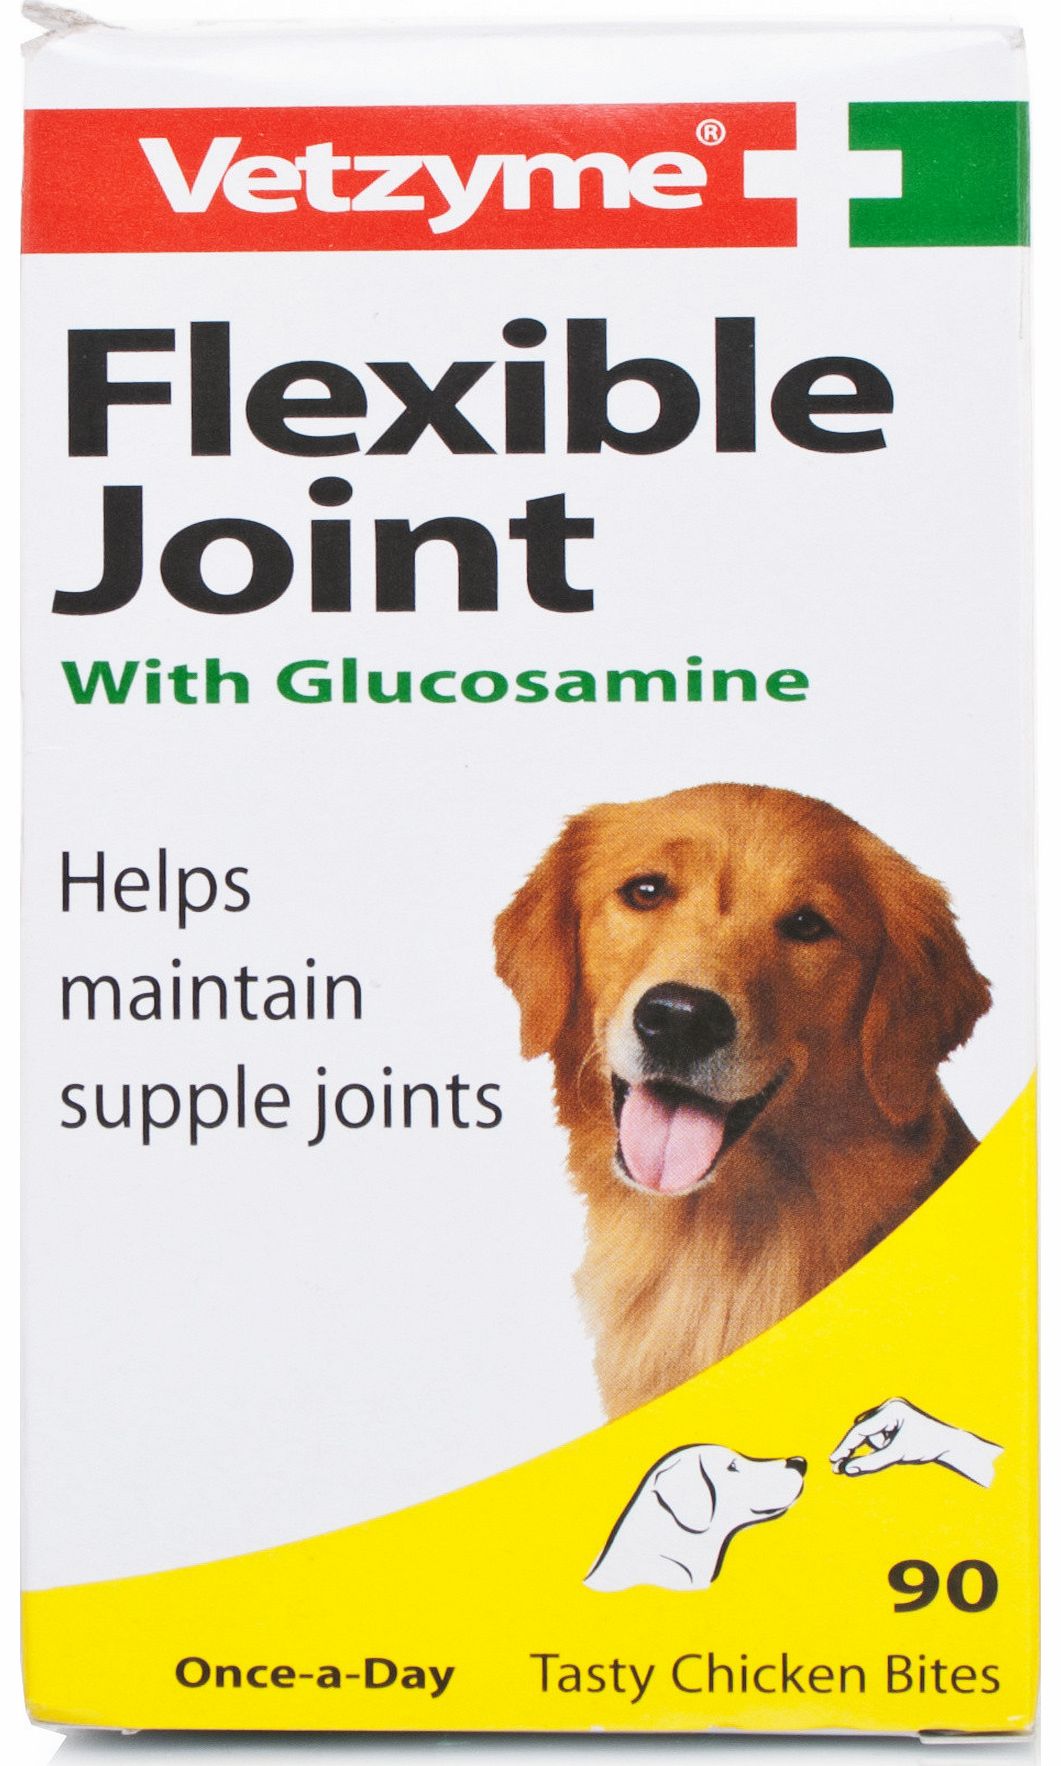 Vetzyme Flexible Joint With Glucosamine